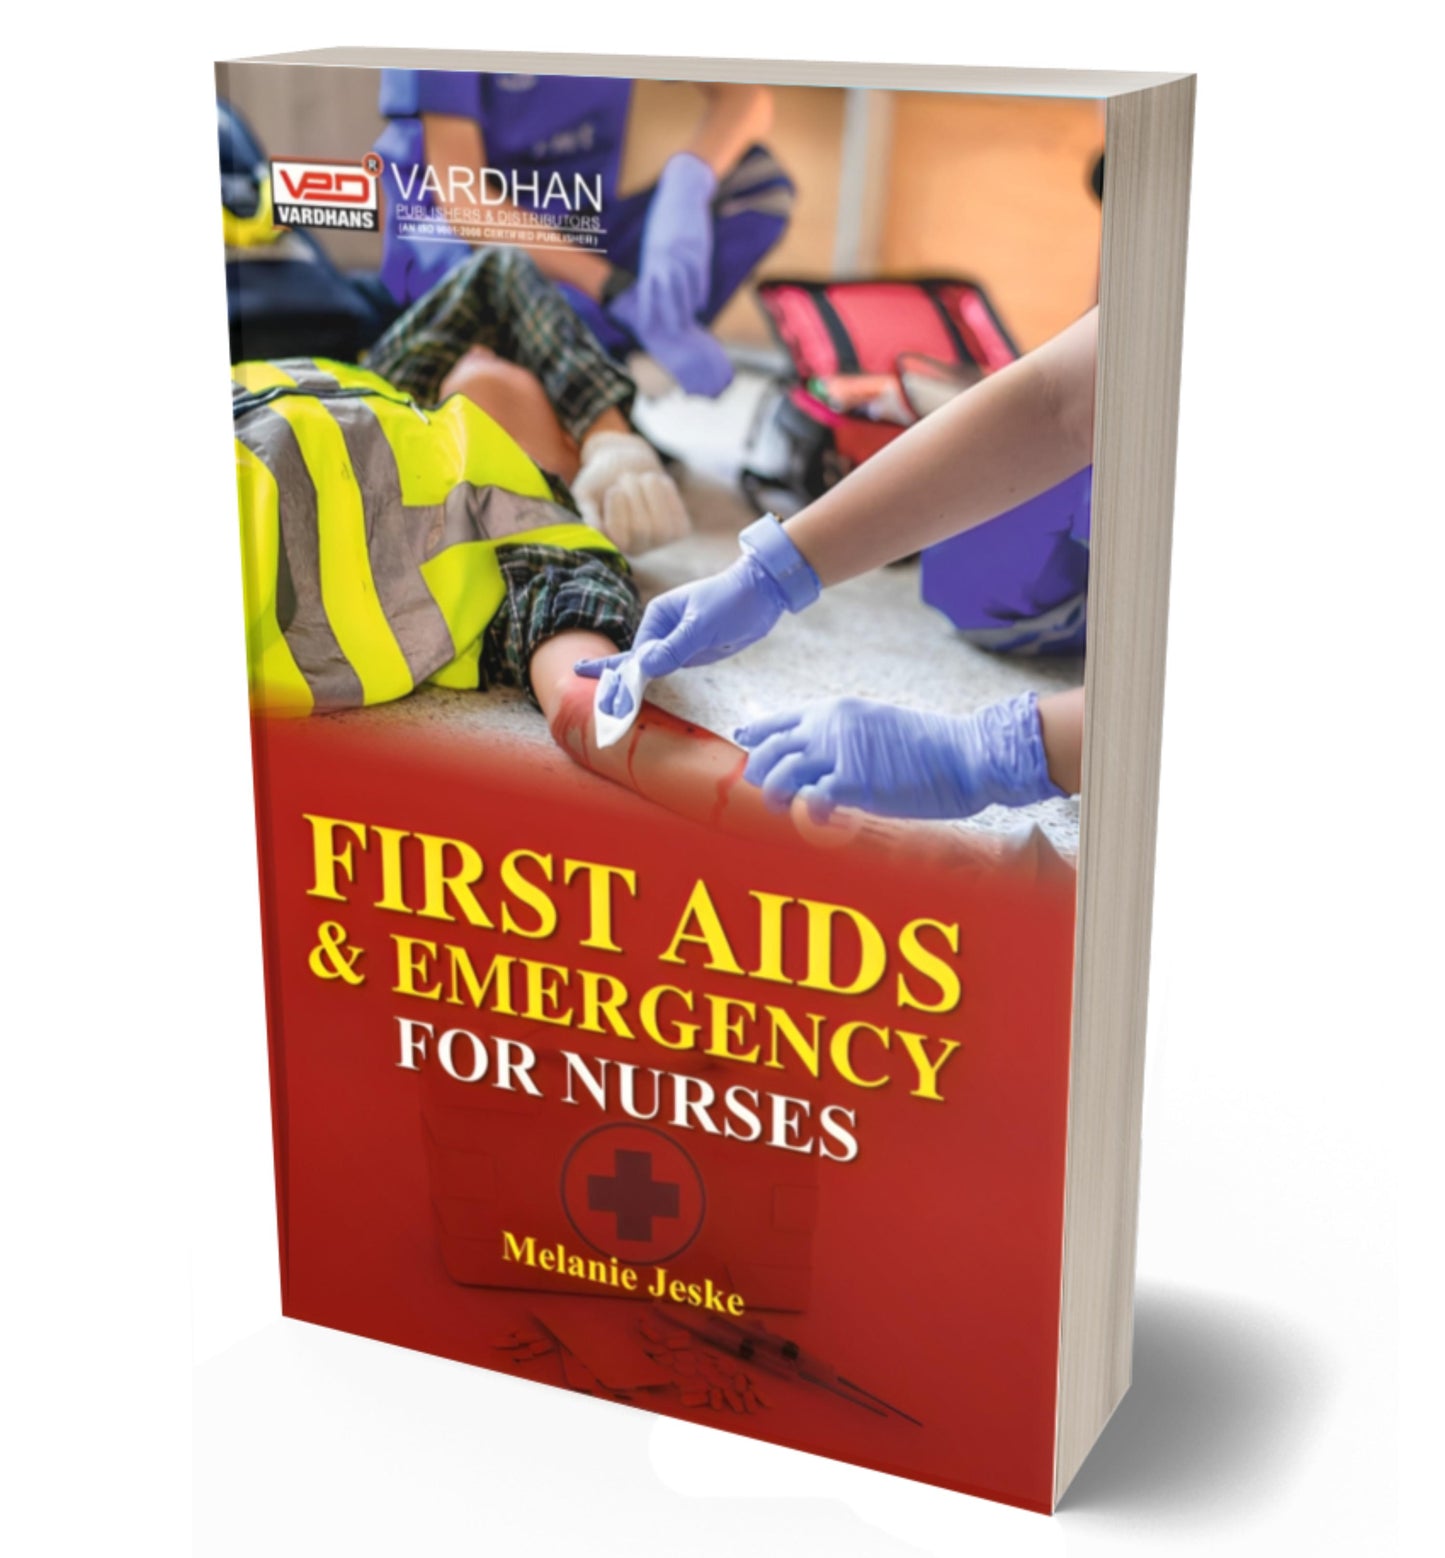 First Aids & Emergency for Nurses